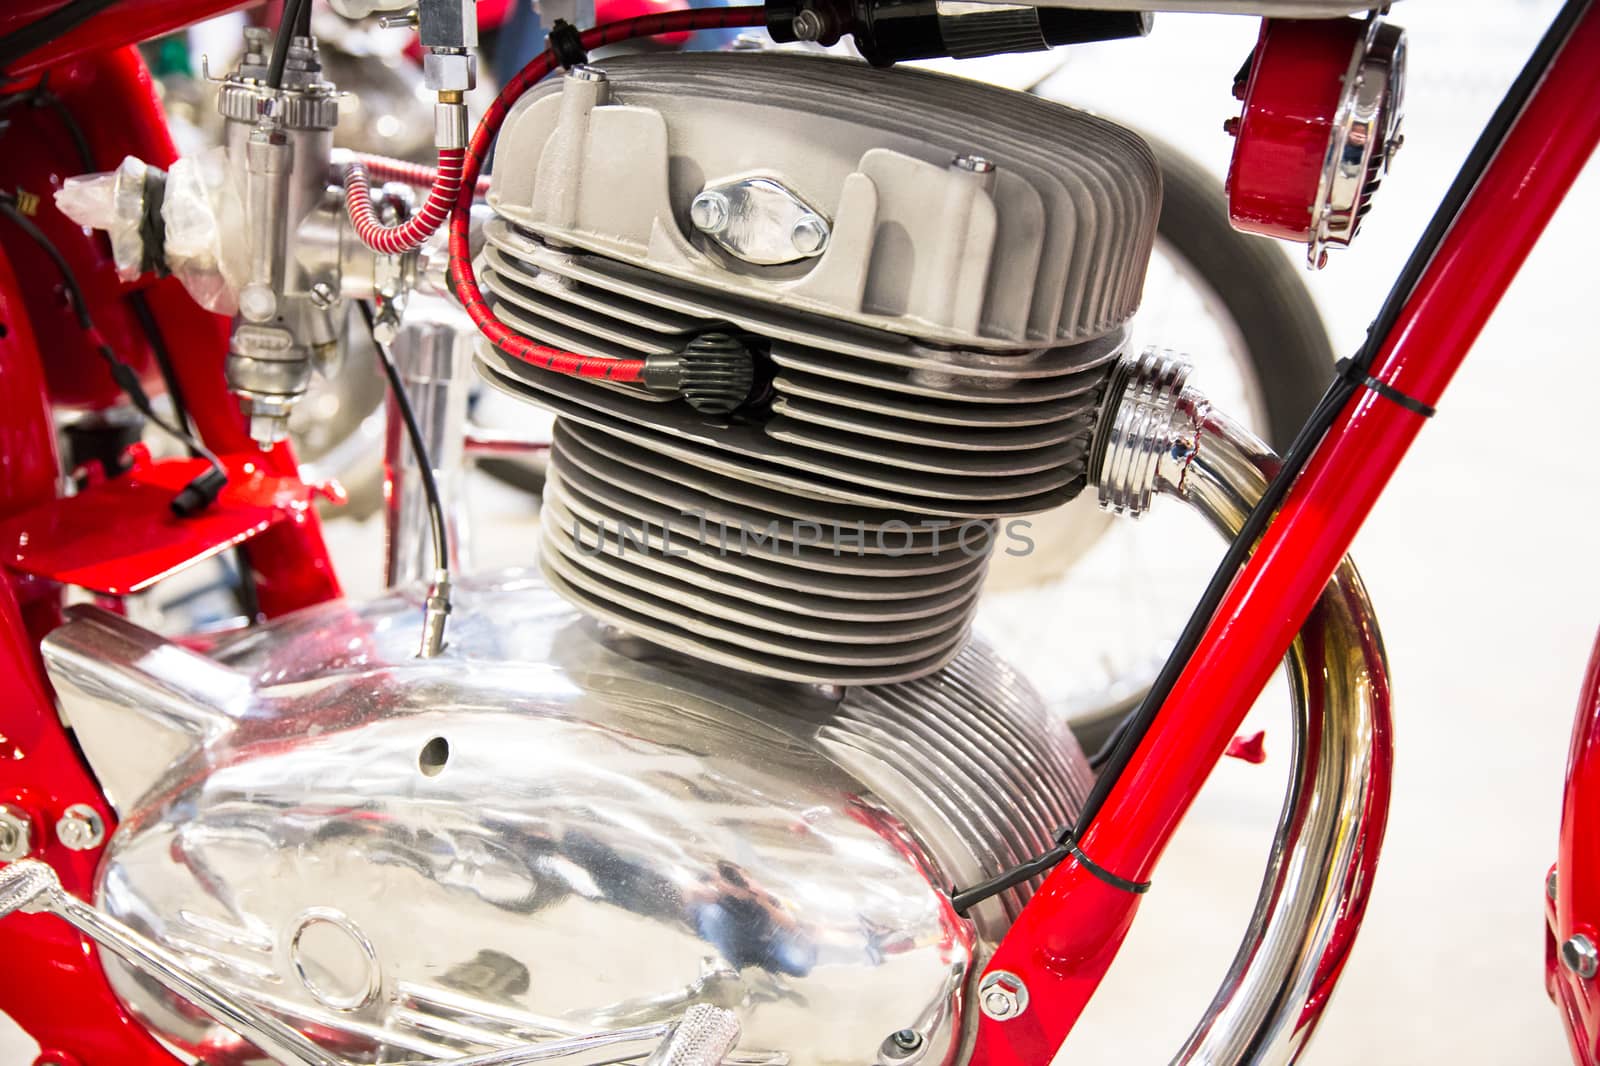 detail of the head of the engine of a red vintage motorcycles